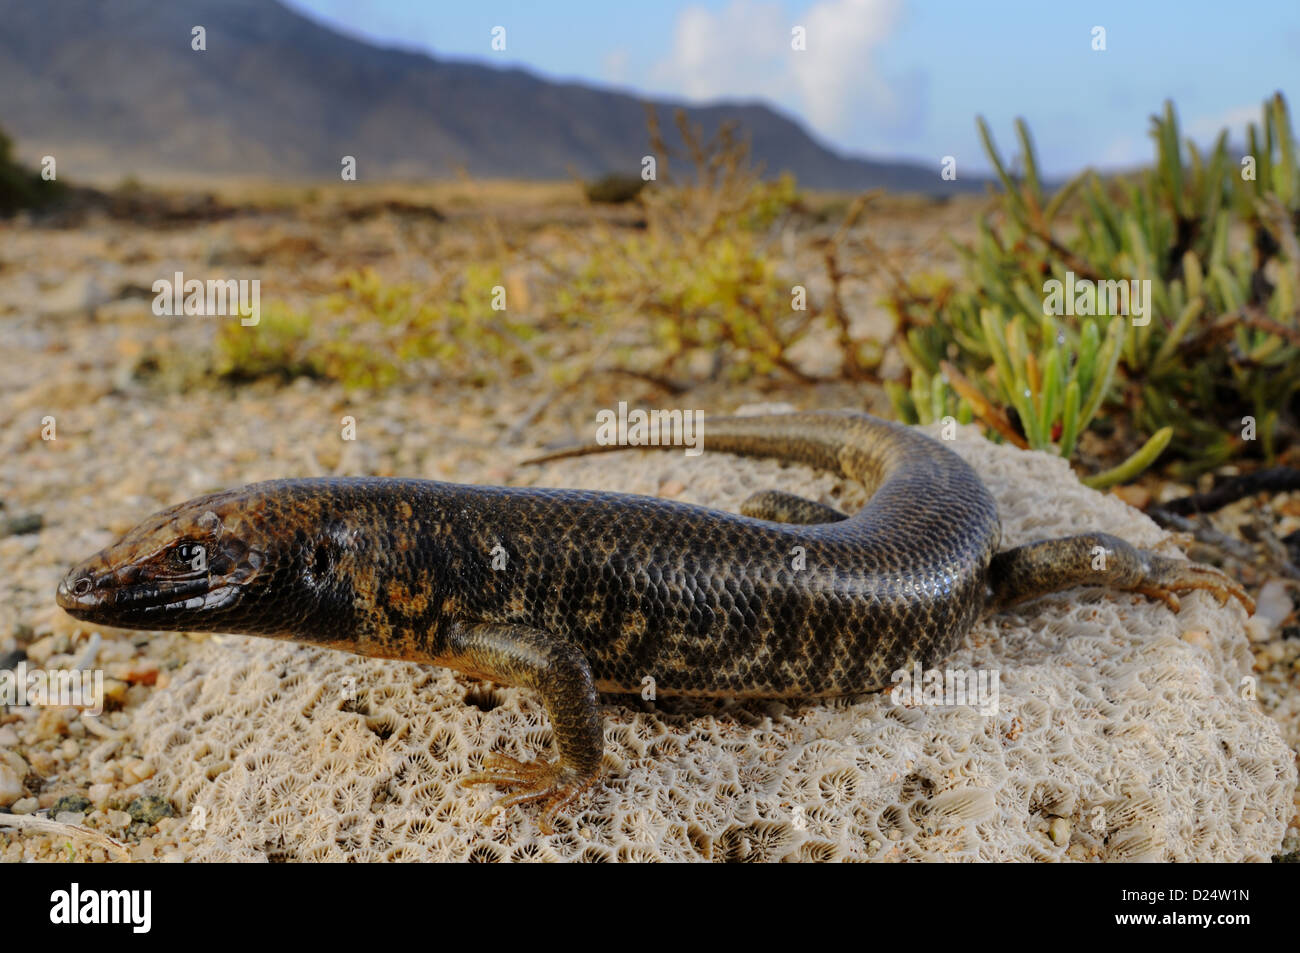 Abd al Kuri Skink Trachylepis cristinae newly discovered species described in 2010 adult on Madrepore coral fossil rock in Stock Photo